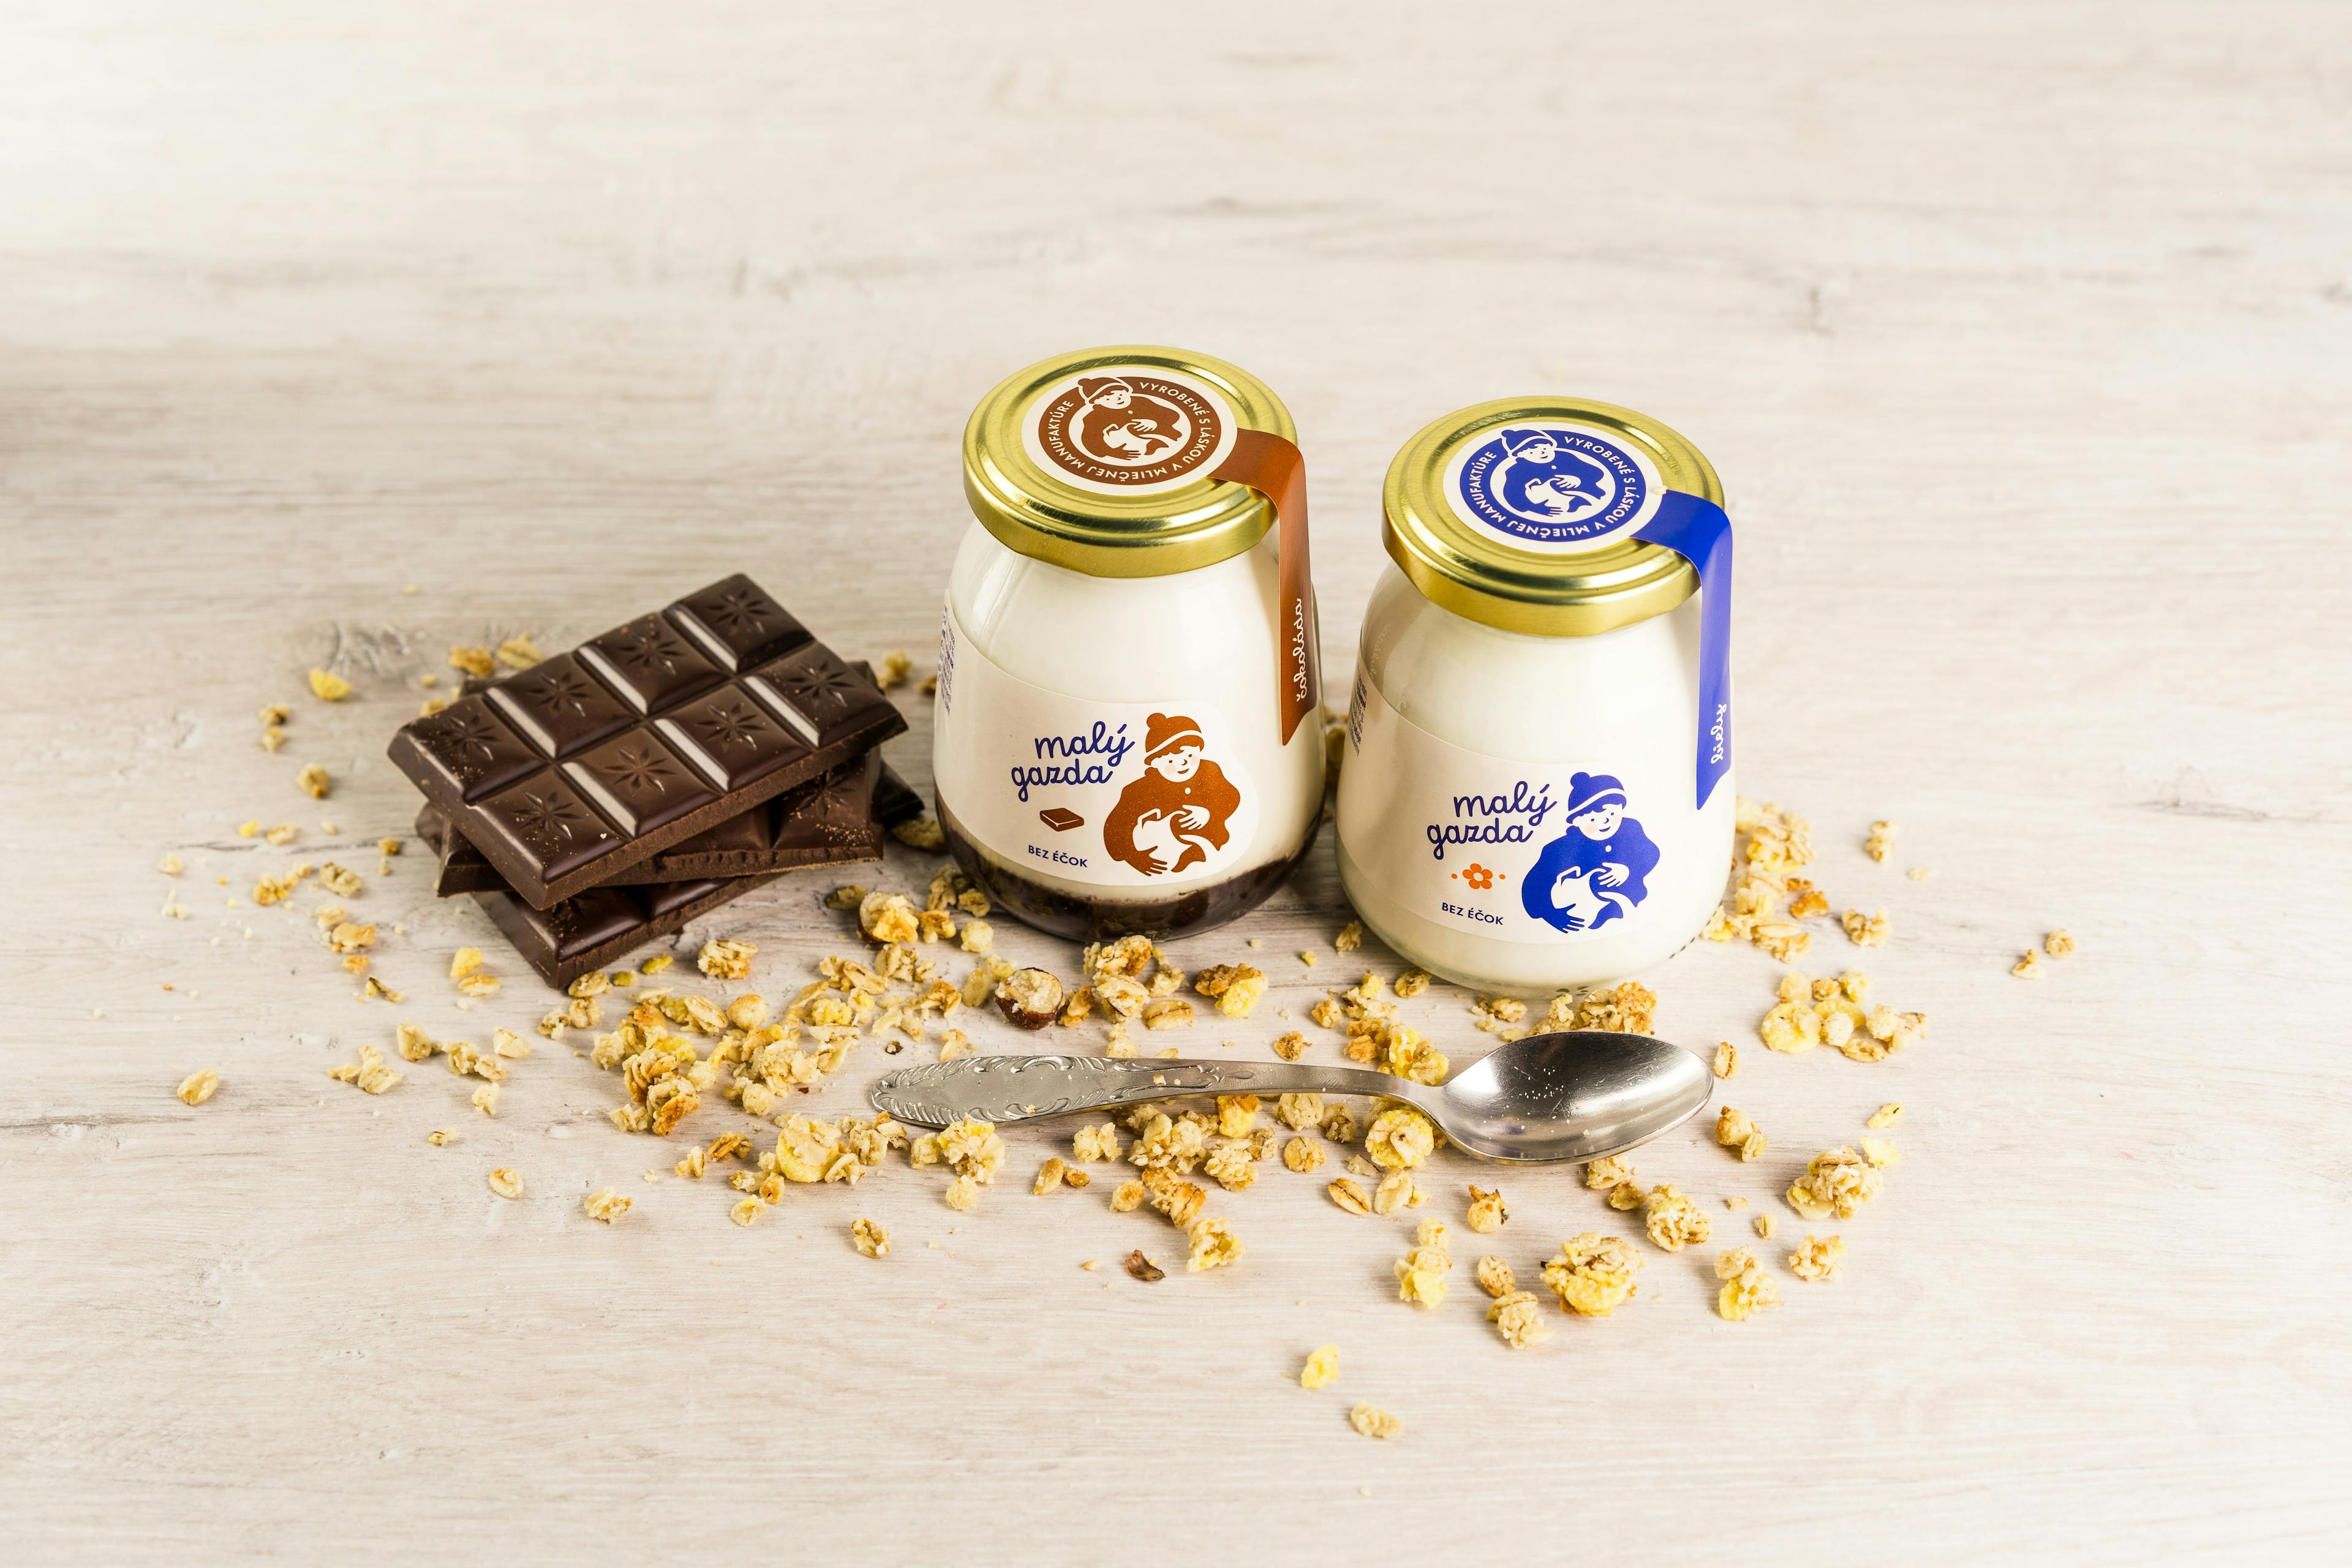 Malý Gazda – the transformation of a family-run mini dairy company to a premium dairy manufacturer with international ambitions